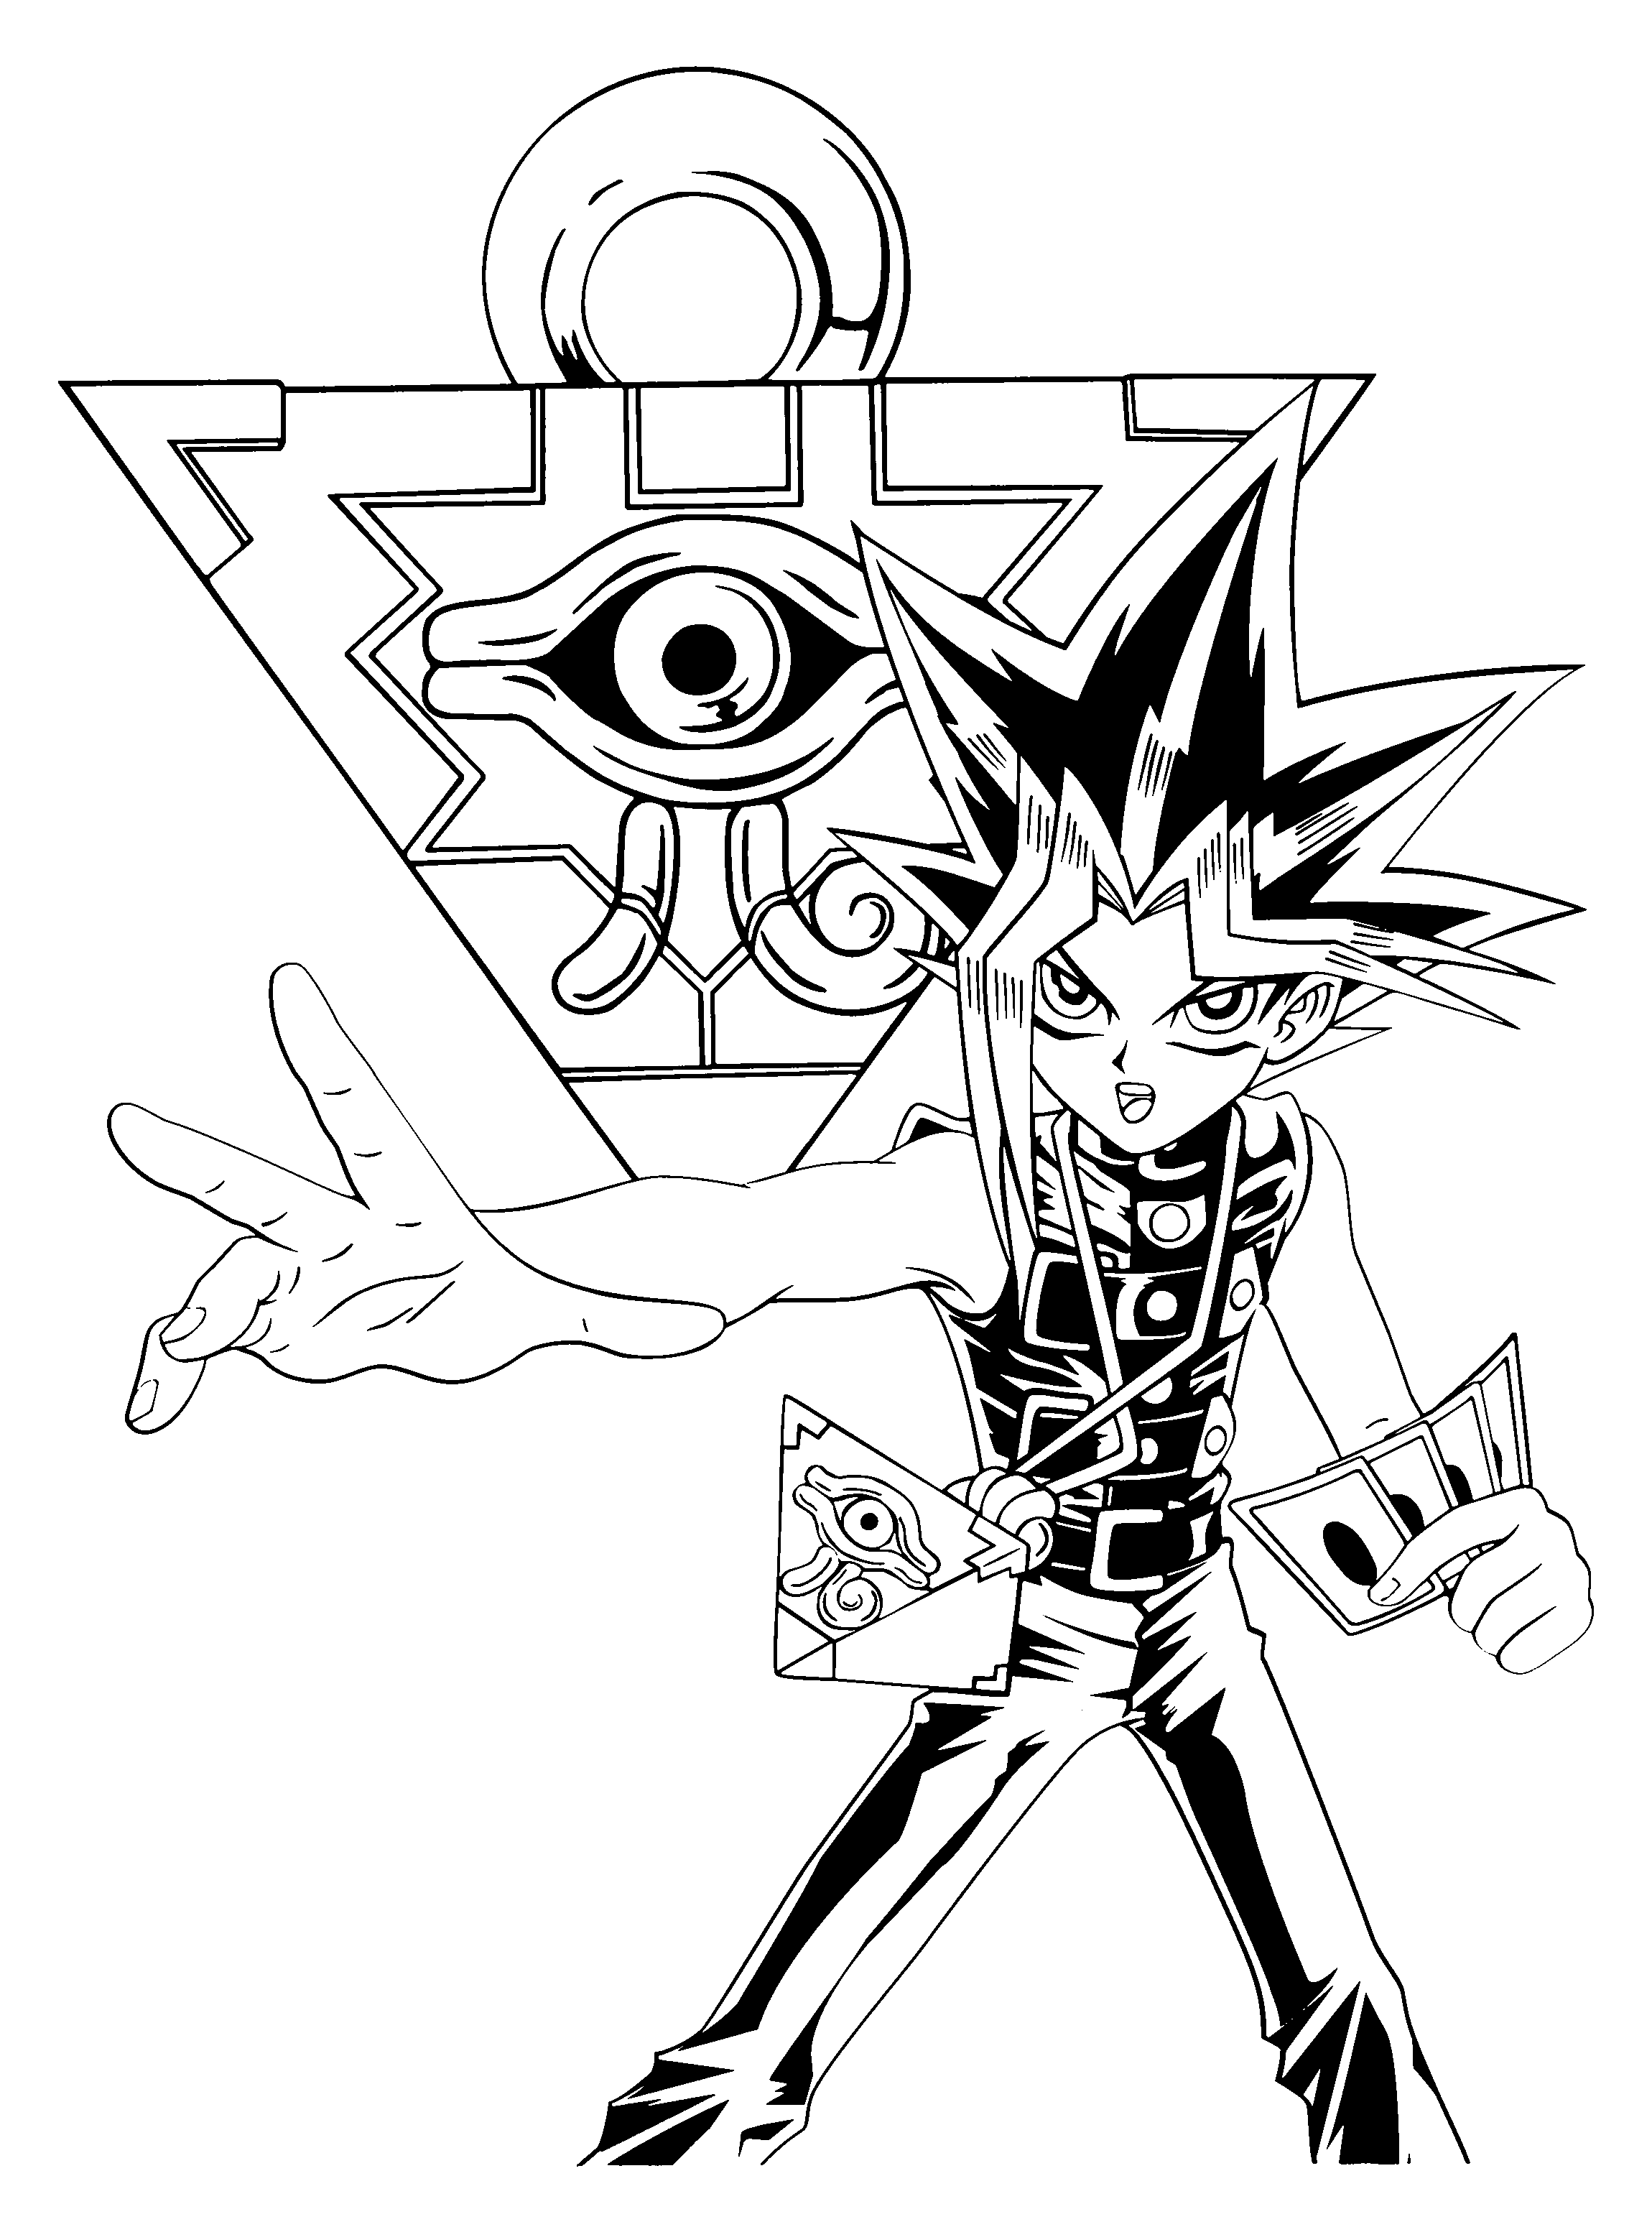 Yu-Gi-Oh! #33 (Cartoons) – Printable coloring pages